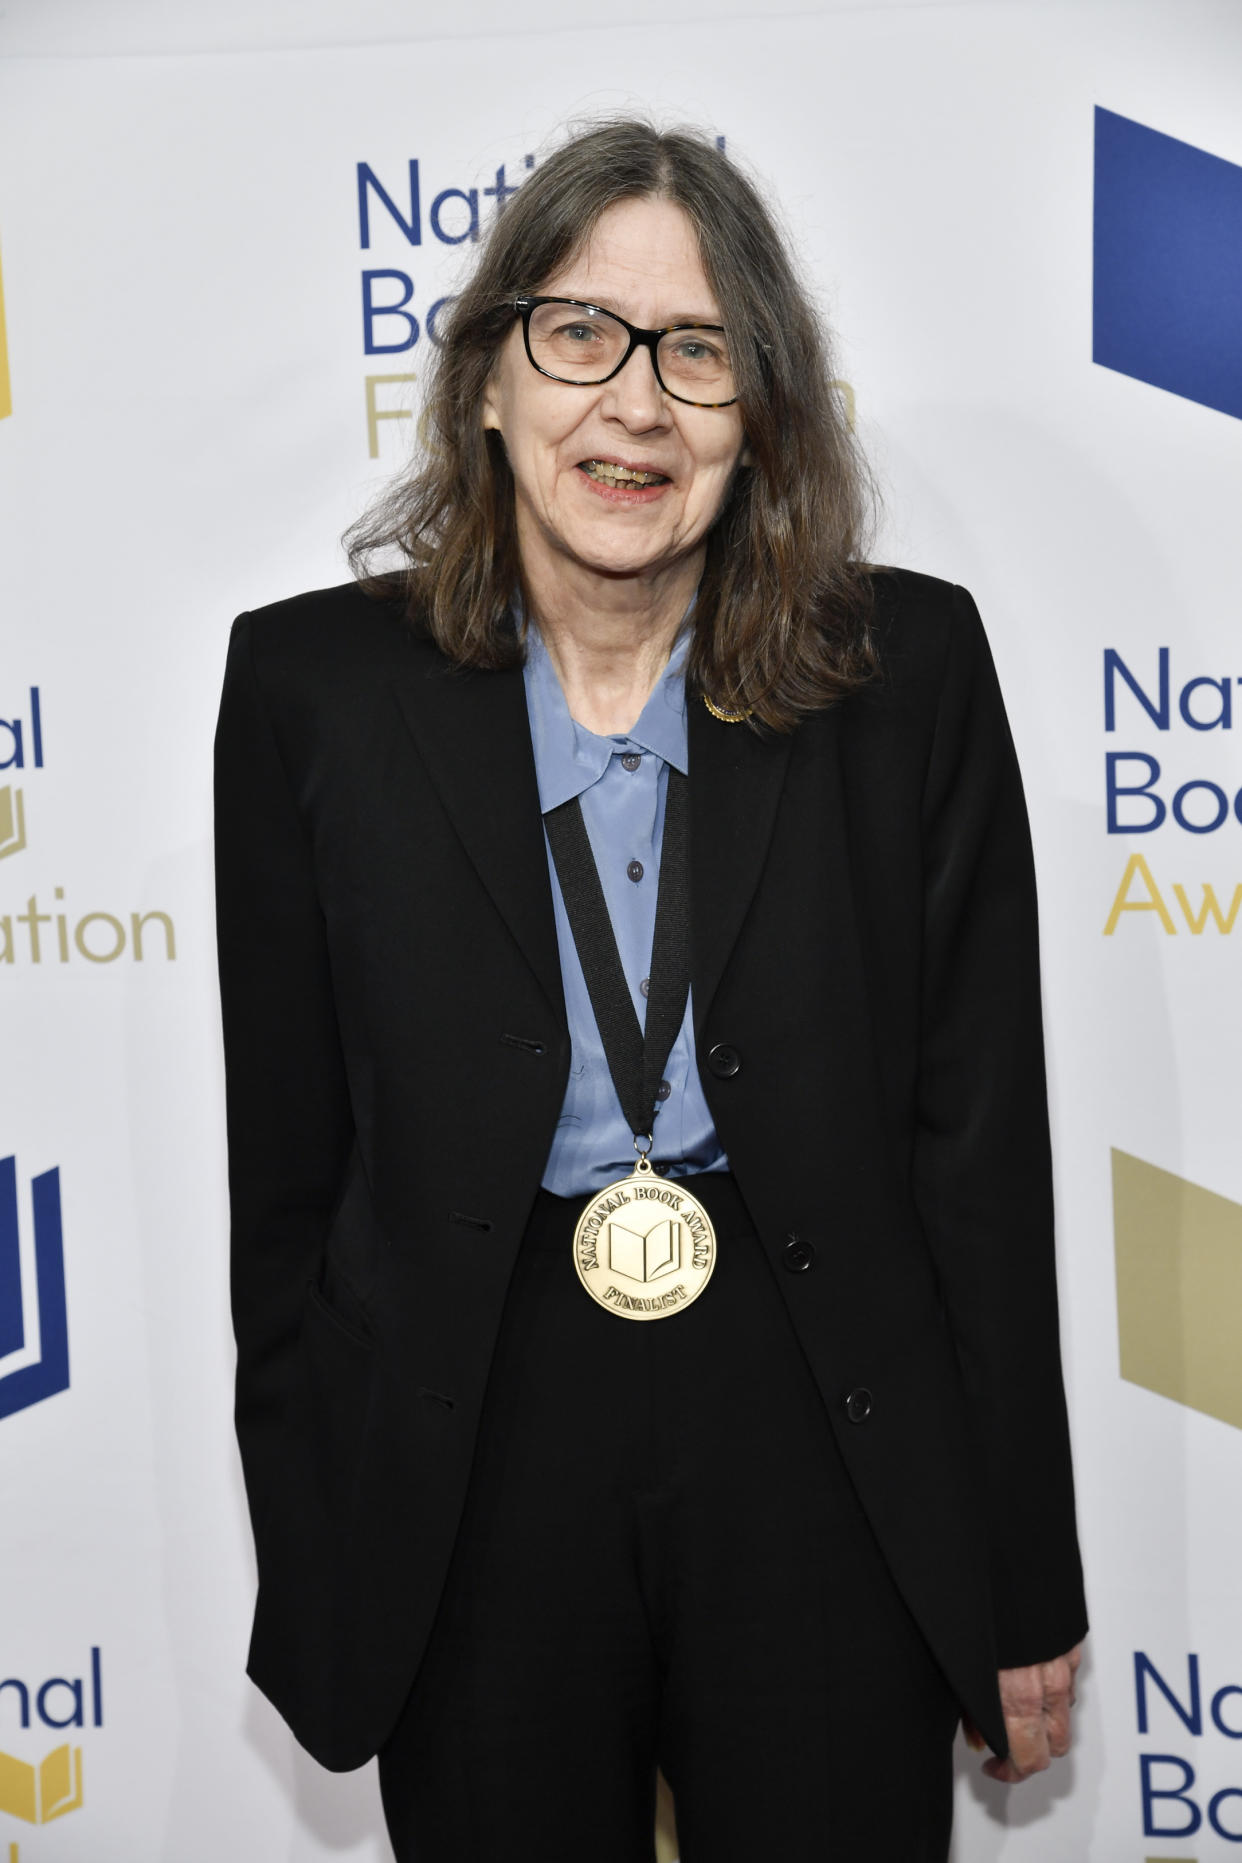 Margaret Mitsutani attends the 73rd National Book Awards at Cipriani Wall Street, on Wednesday, Nov. 16, 2022, in New York. (Photo by Evan Agostini/Invision/AP)